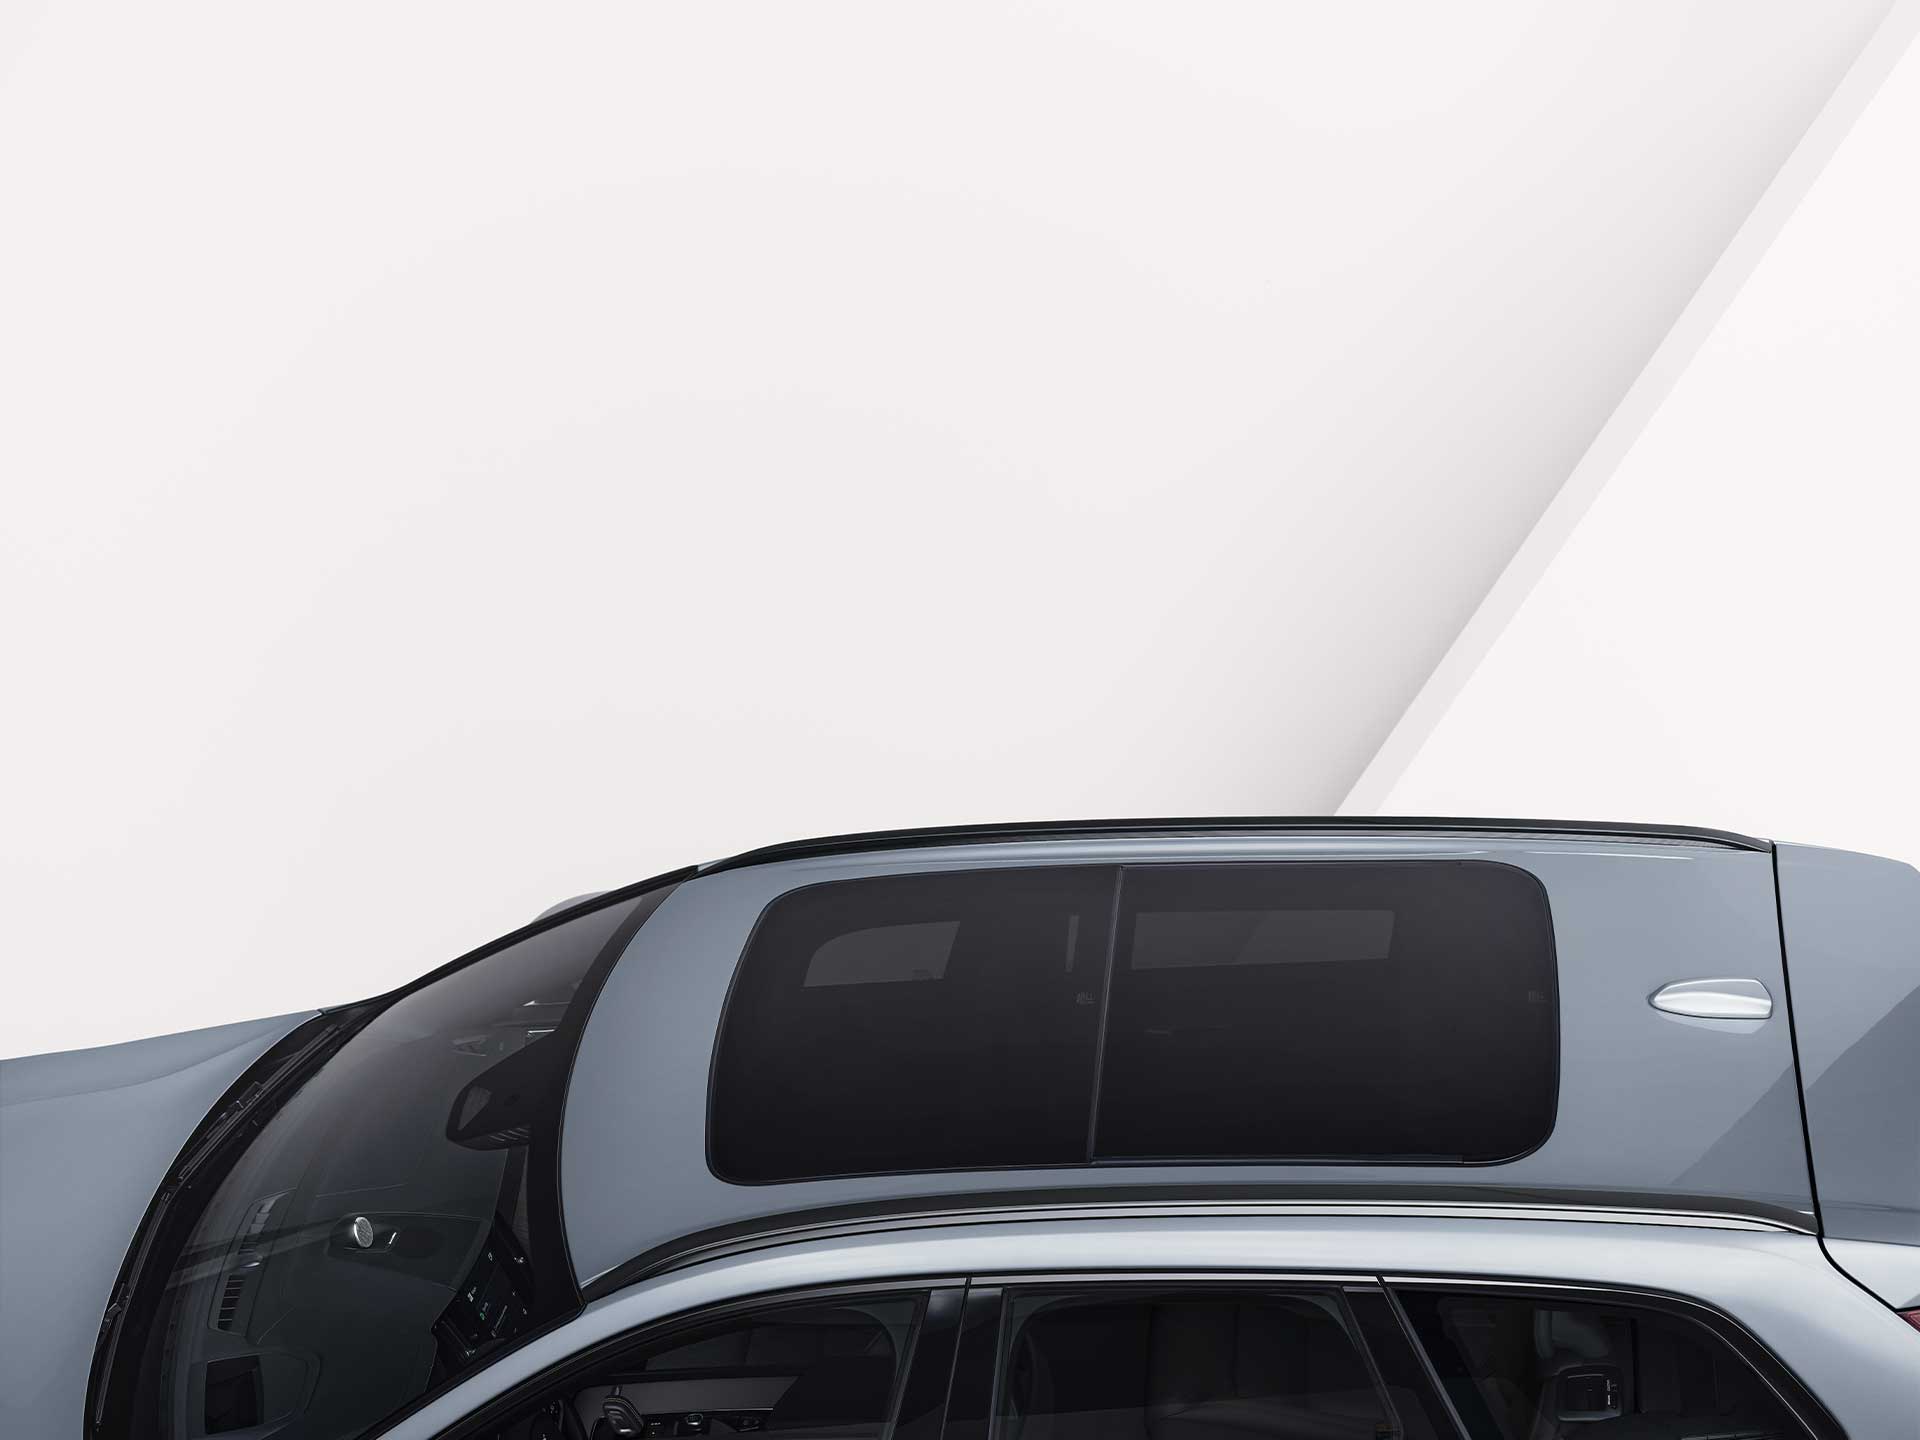 Panoramic roof on a Volvo XC60 SUV.